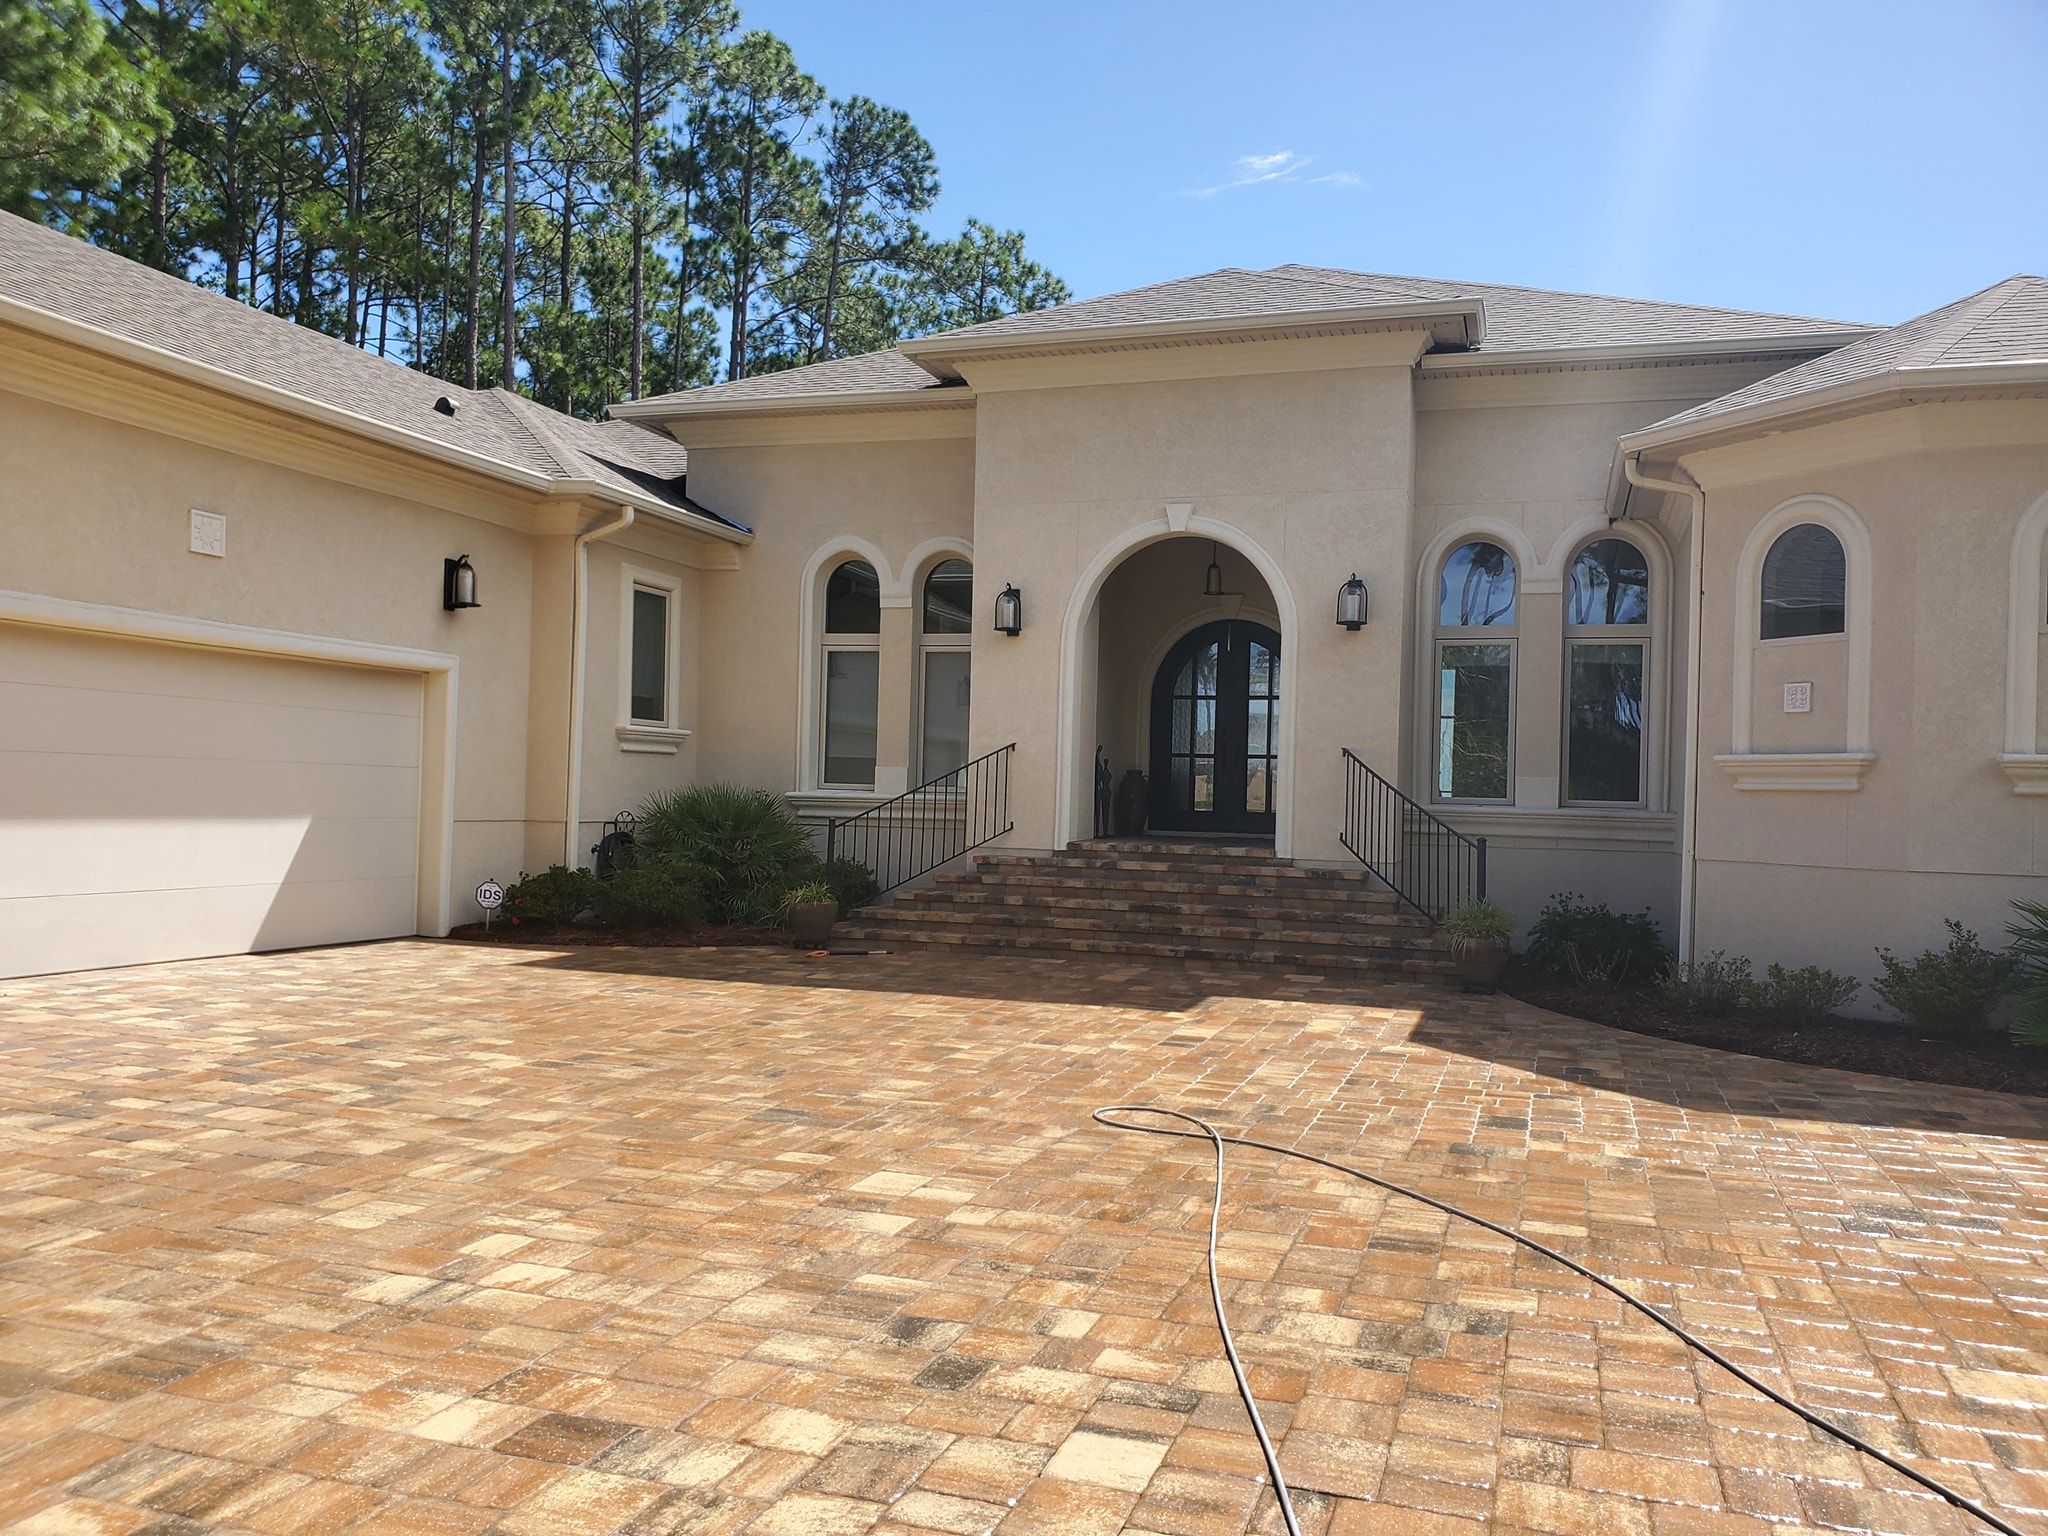 Our Best Work for Precision Exterior Services in Alma, Ga